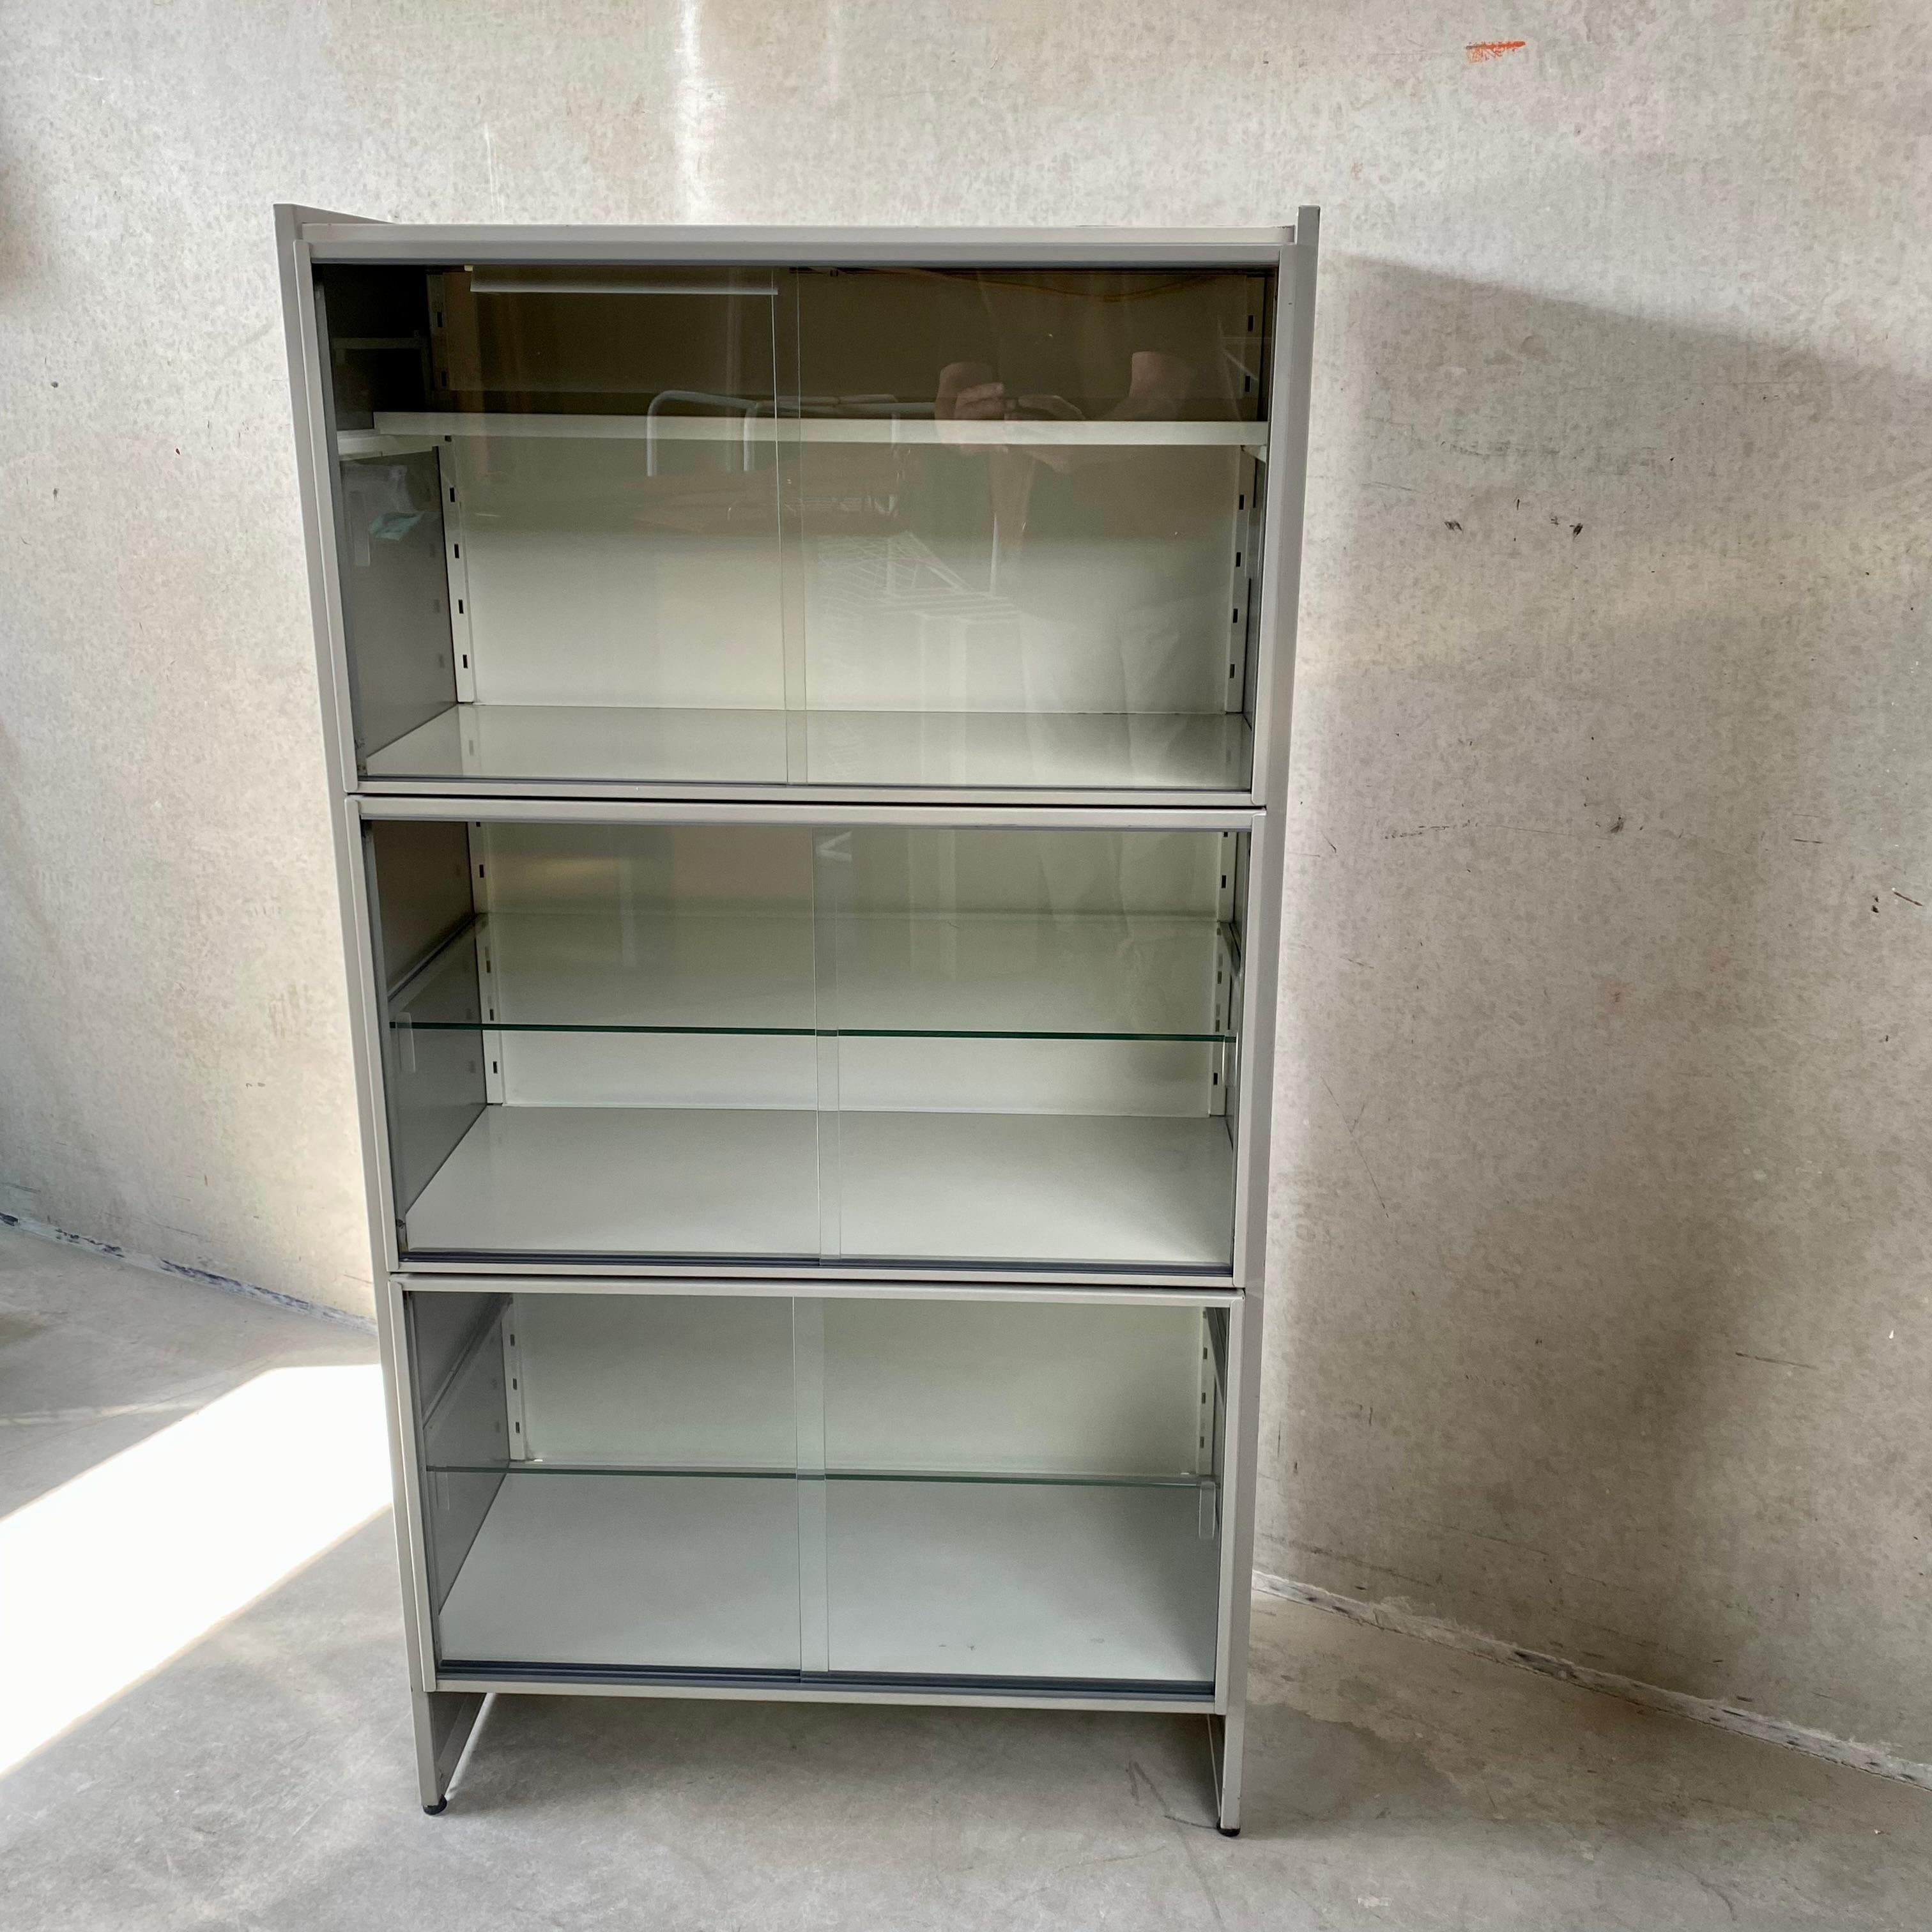 Introducing the Exquisite Grey Metal Vitrine Storage Unit by Gispen, Model 5600: A Timeless Dutch Design Treasure

Discover the allure of timeless design with the Grey Metal Vitrine Storage Unit by Gispen, an iconic piece expertly crafted in